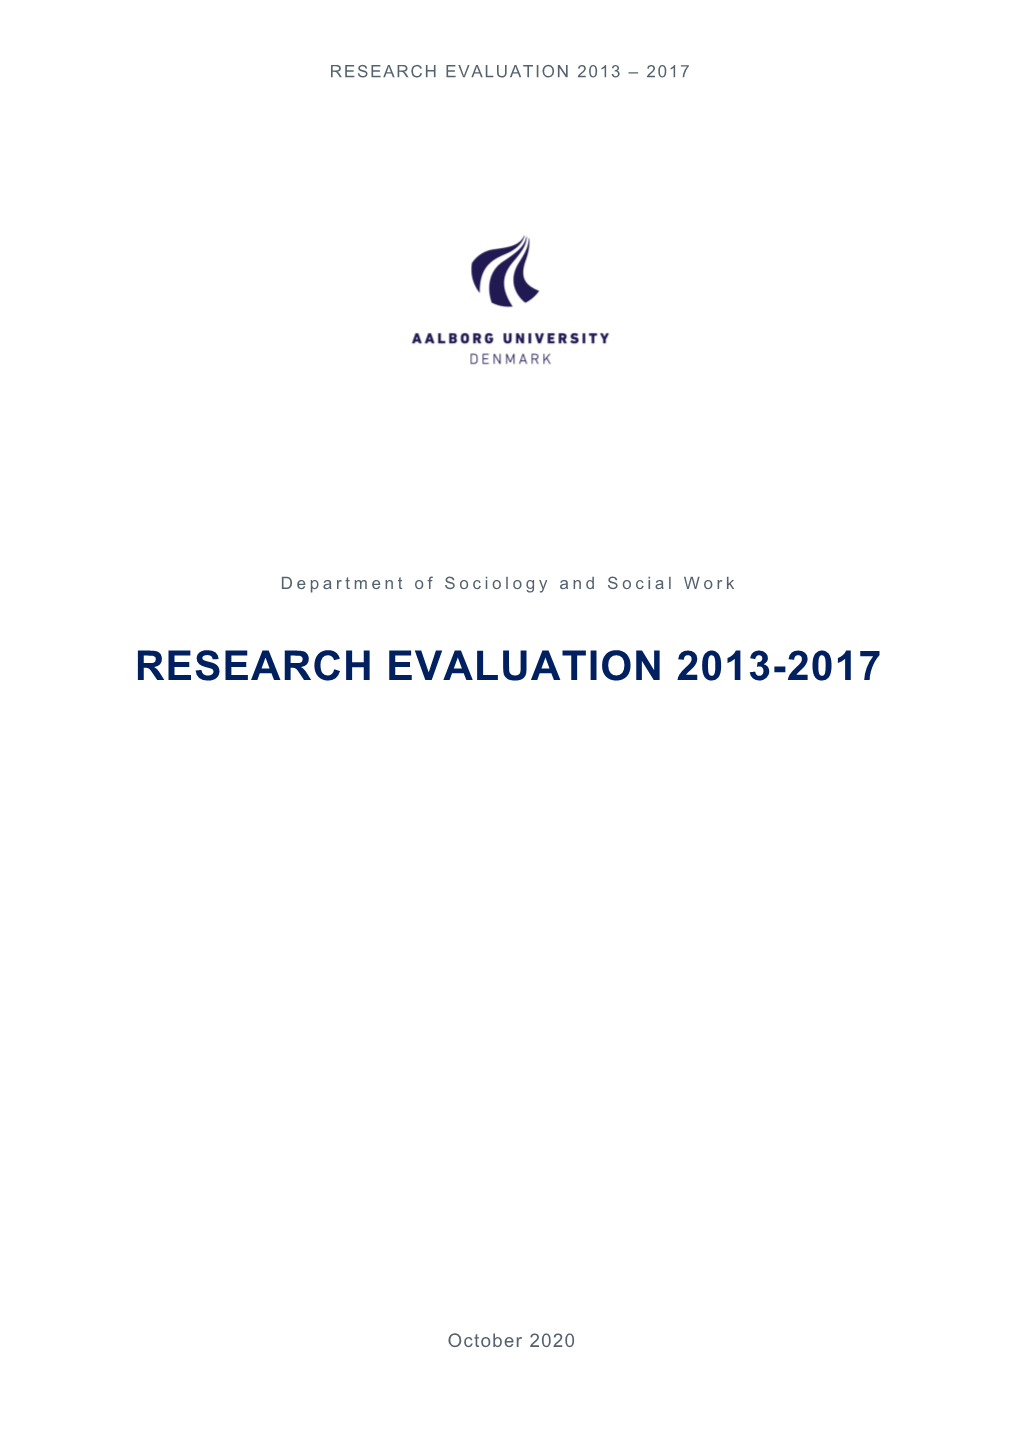 Research Evaluation 2013-2017